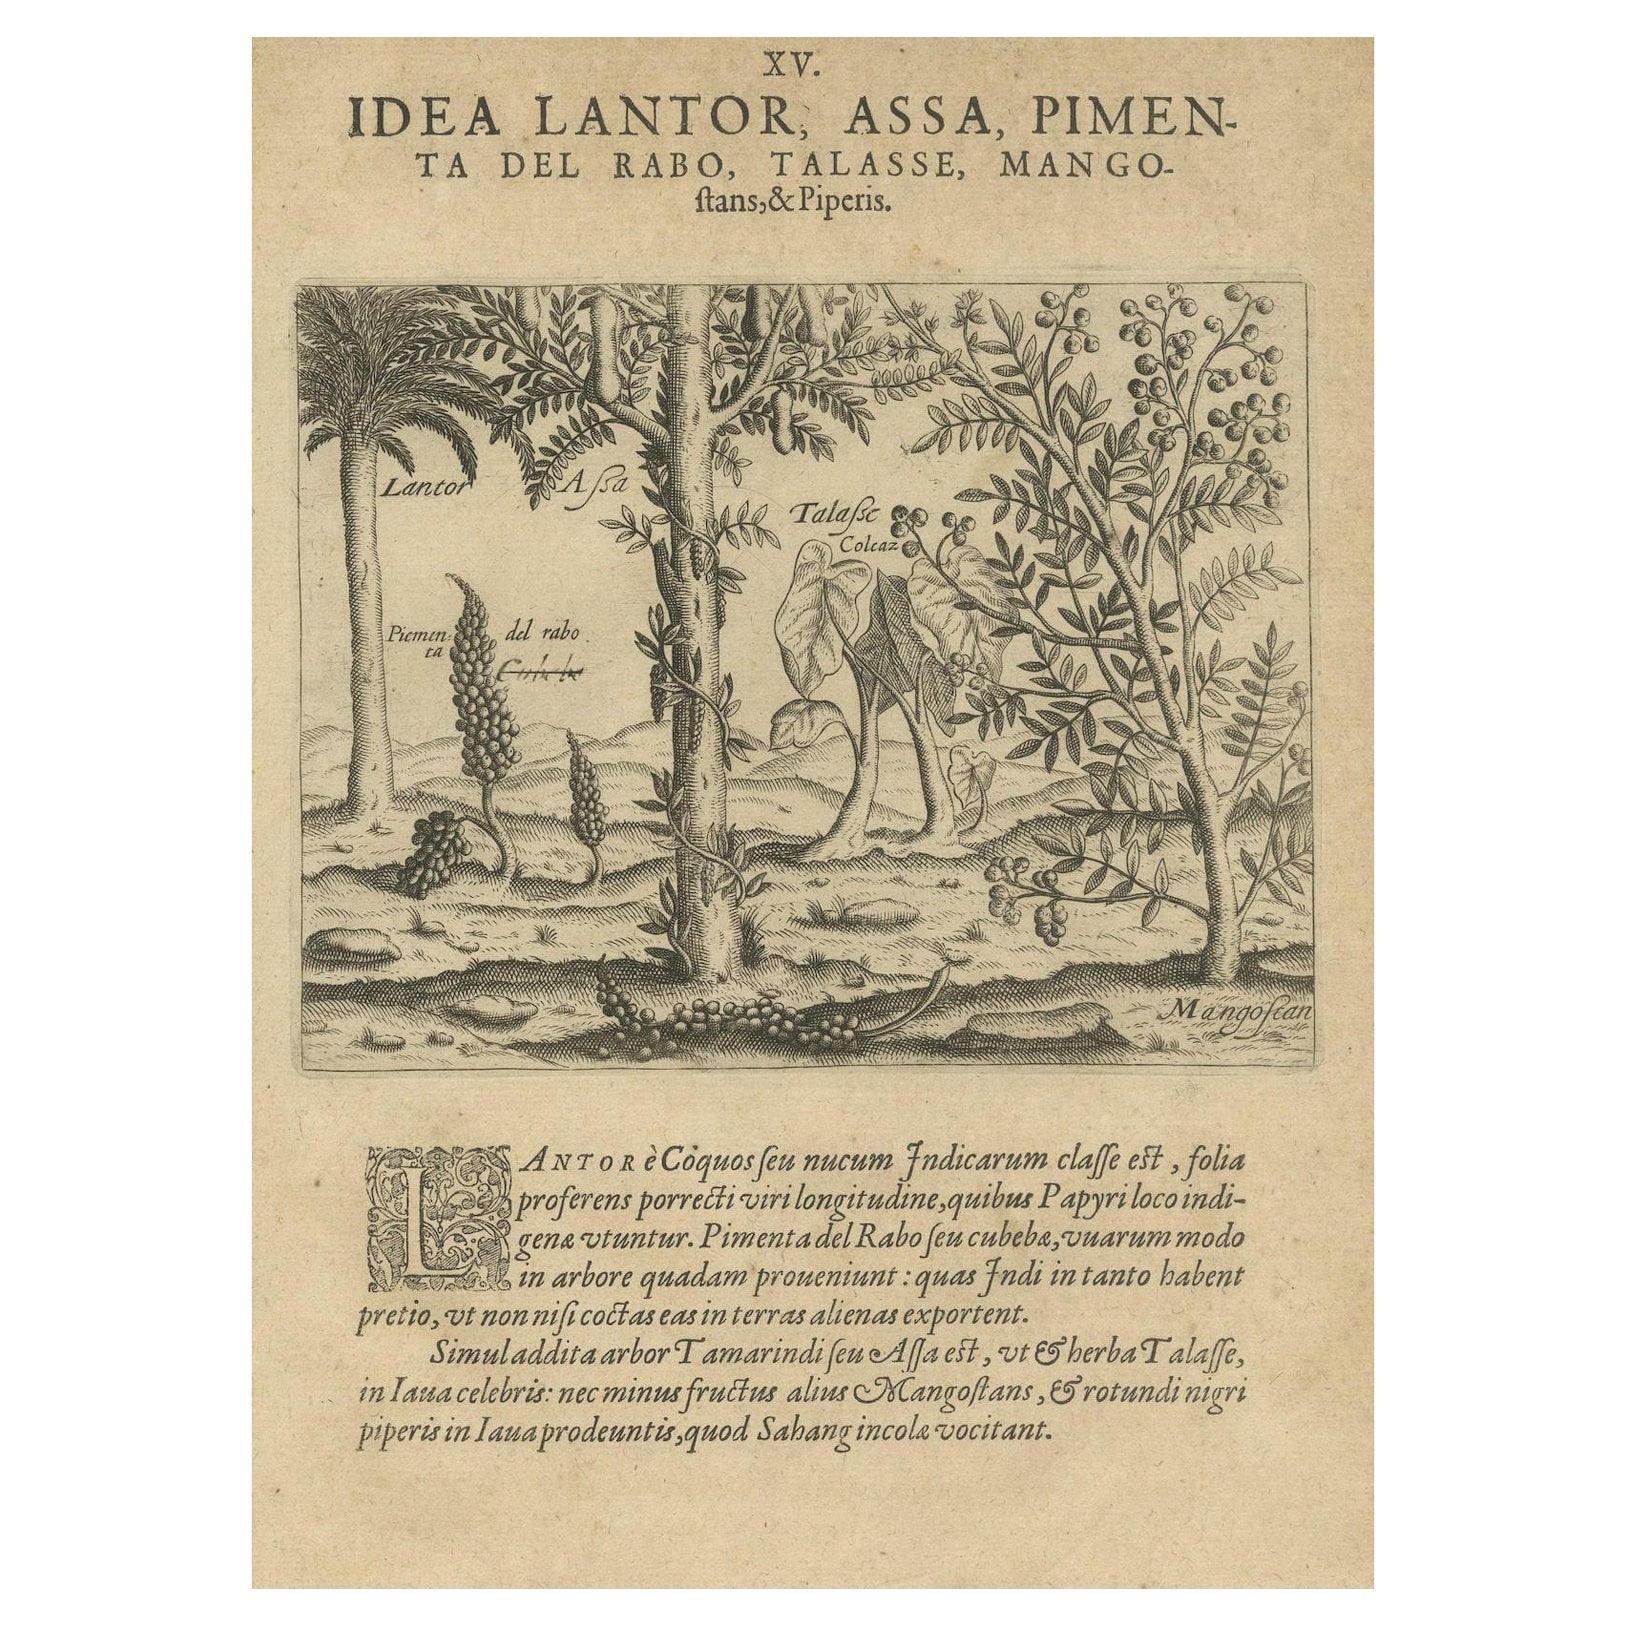 Verdant Wonders: Exotic Trees and Spices of India in De Bry's 1601 Illustration